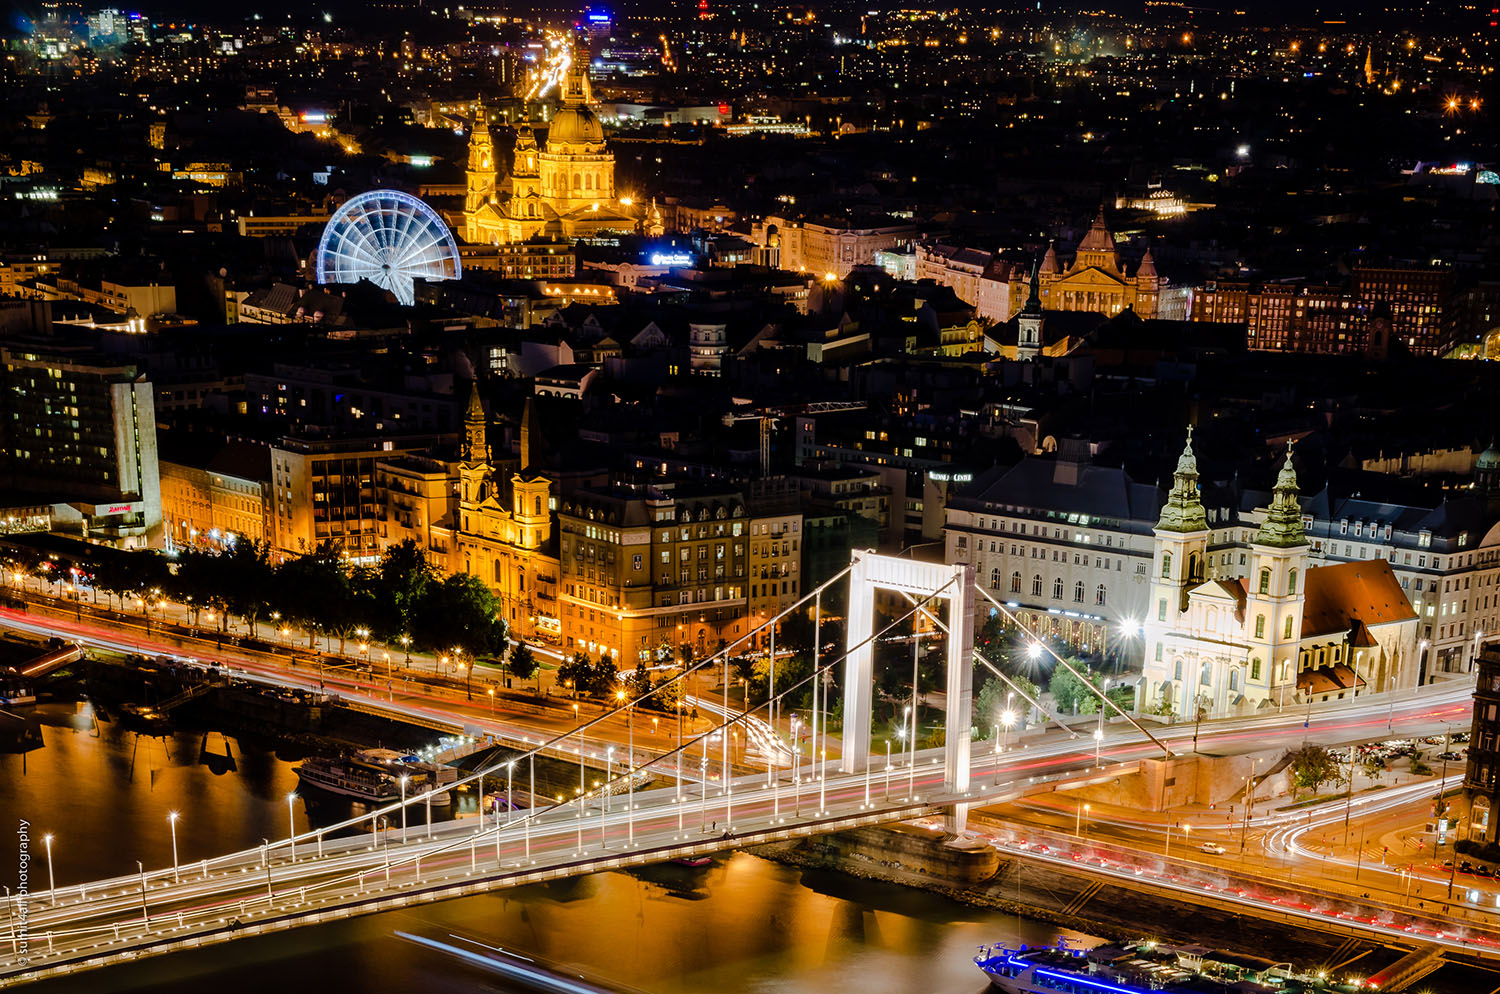 The Elisabeth Bridge illuminated in white light at night. In the background is the St. Stephen's Basilica.